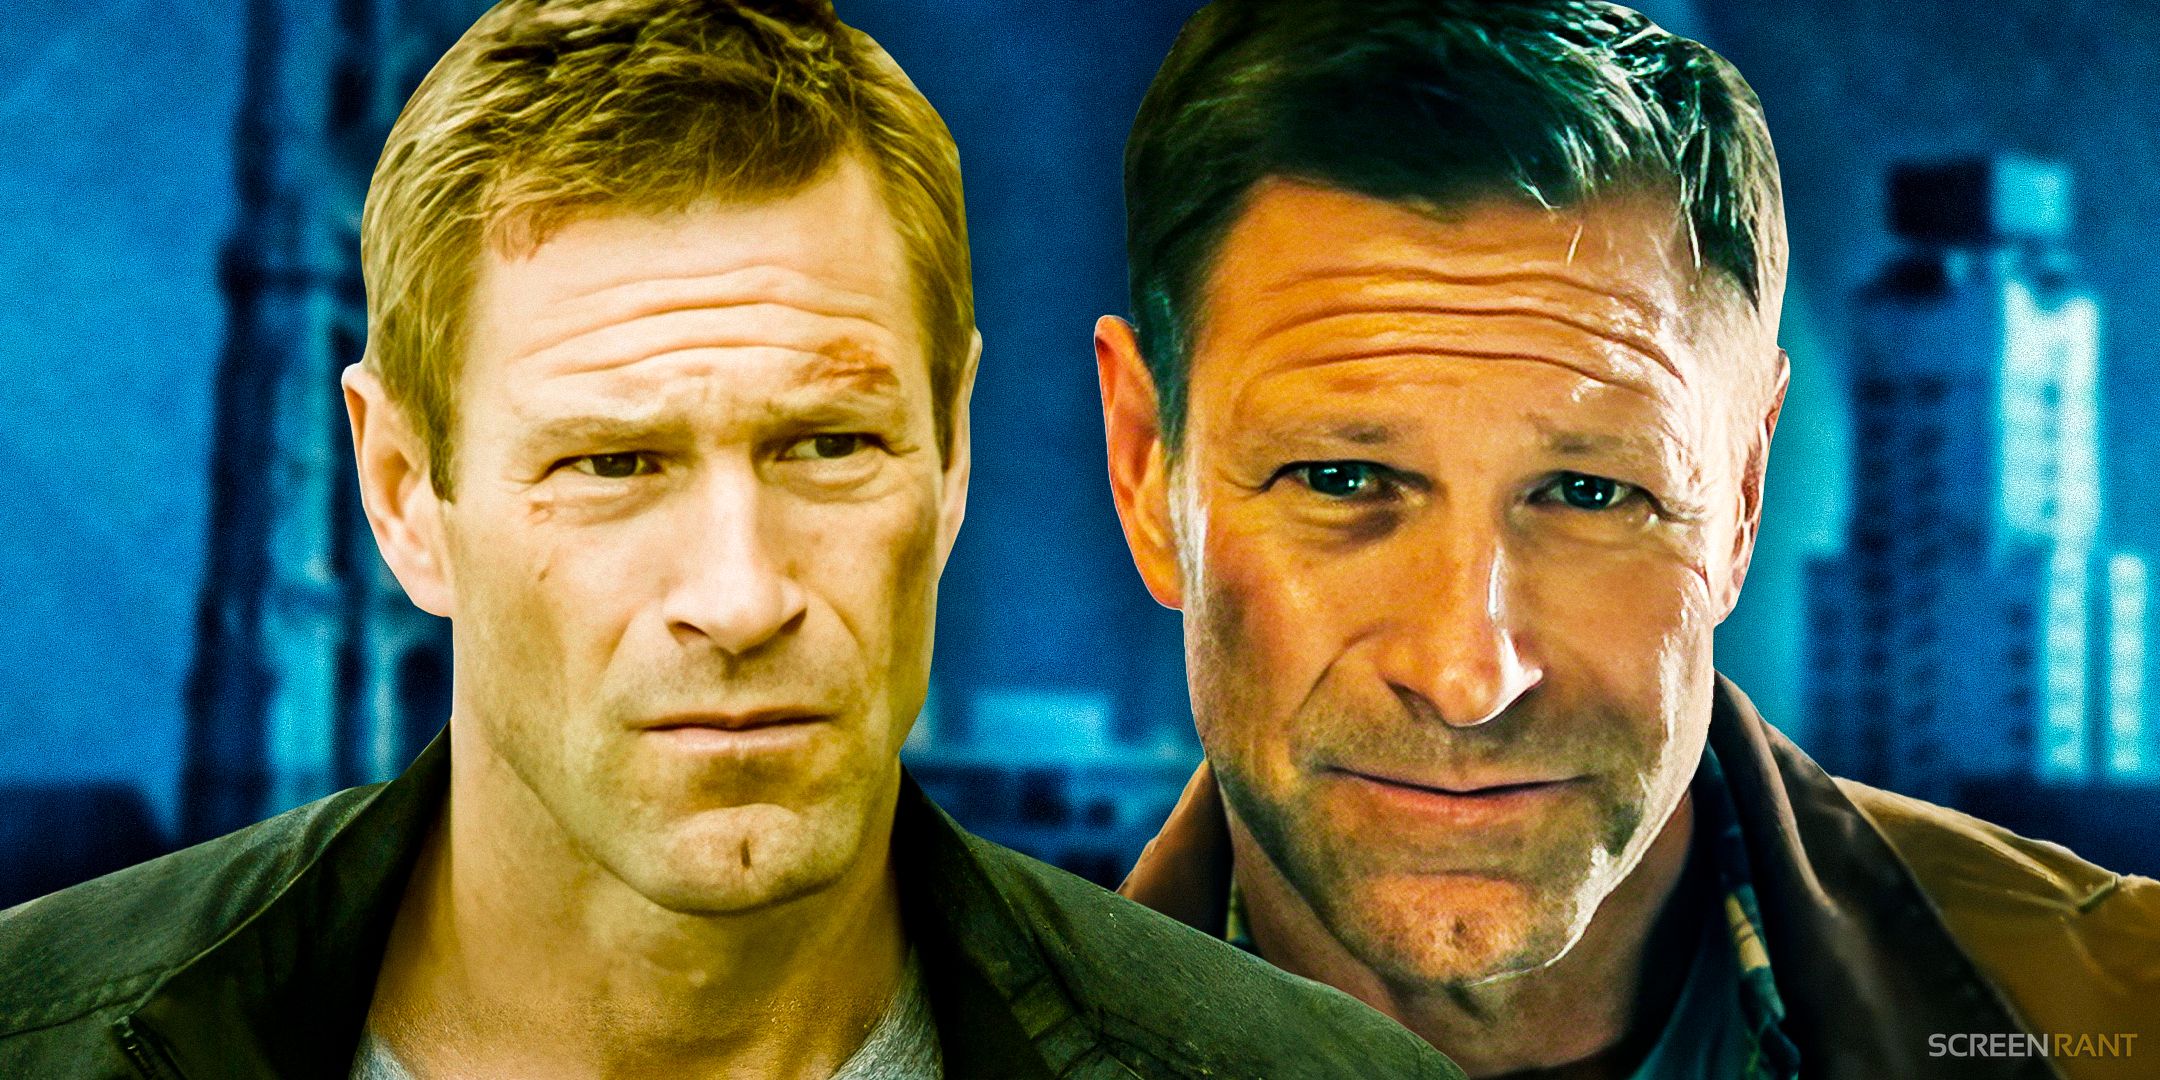 Aaron Eckhart as Steve Vail from The Bricklayer and Aaron Eckhart as Ben Logan from Erased